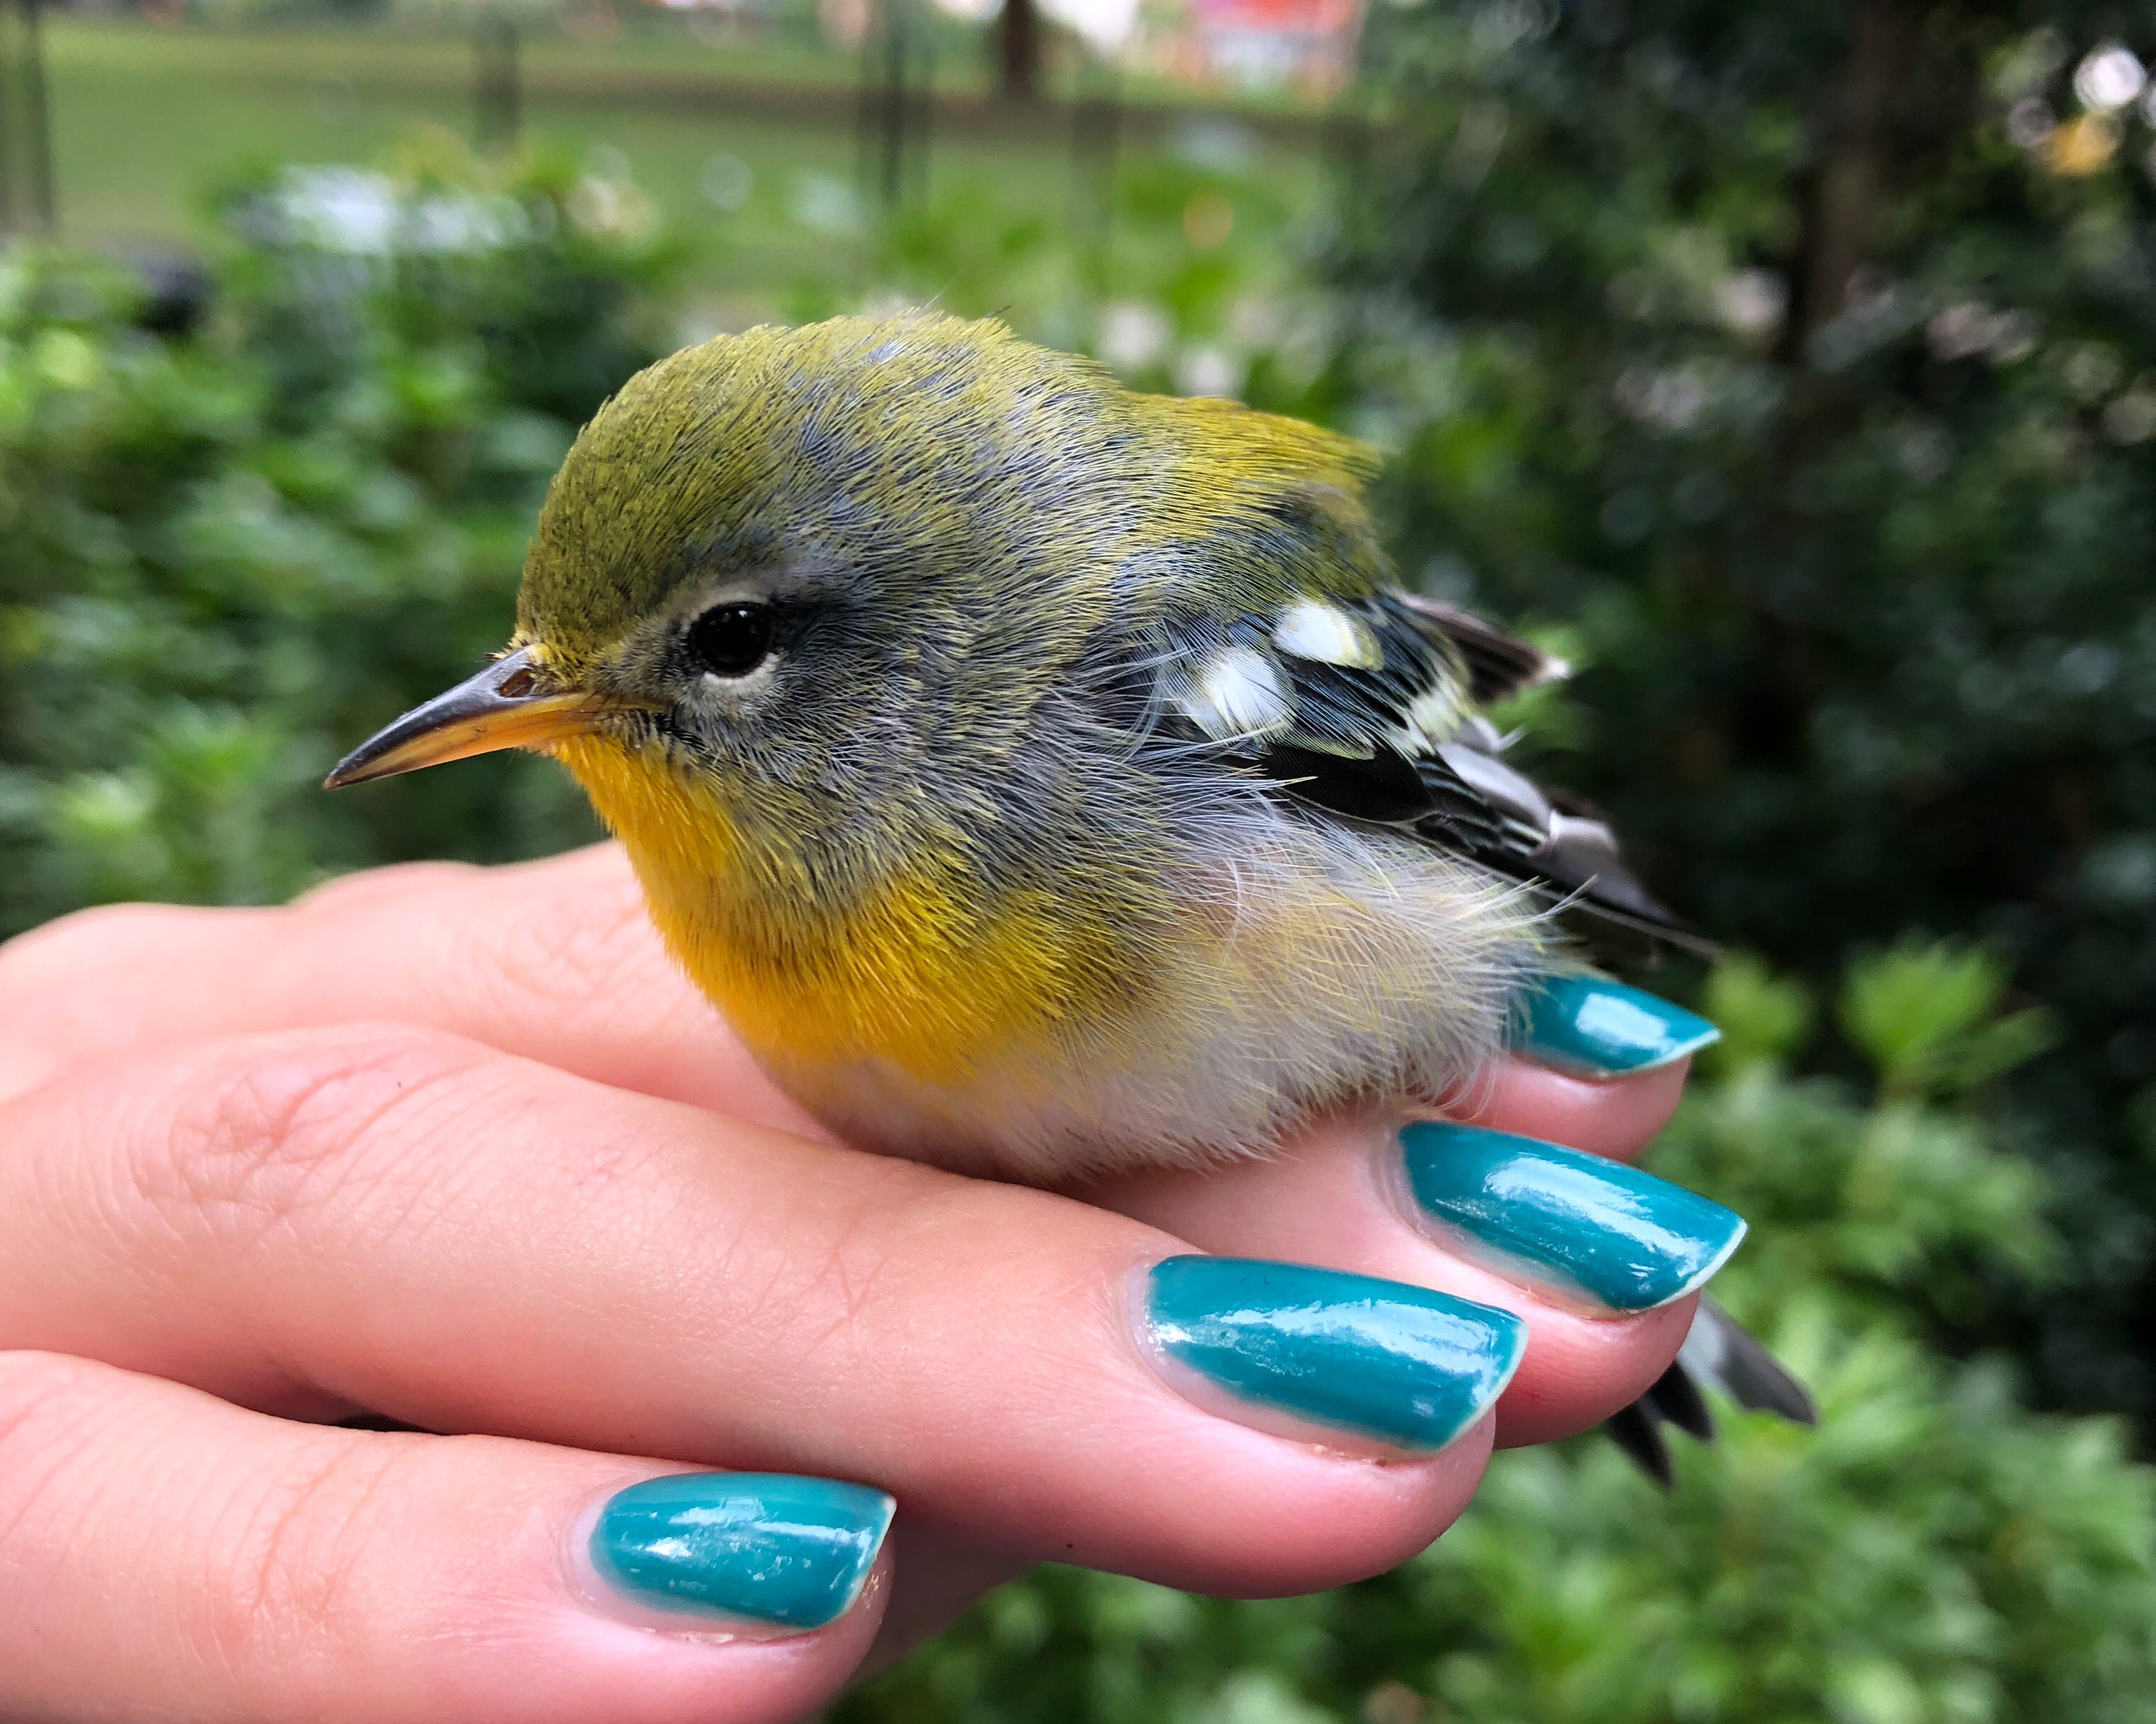 This Northern Parula was found stunned in Manhattan’s Flatiron District. Conservation Biologist Kaitlyn Parkins helped it safely recover at the office before releasing it back into the wild in Madison Square Park, pictured here. Photo: NYC Bird Alliance